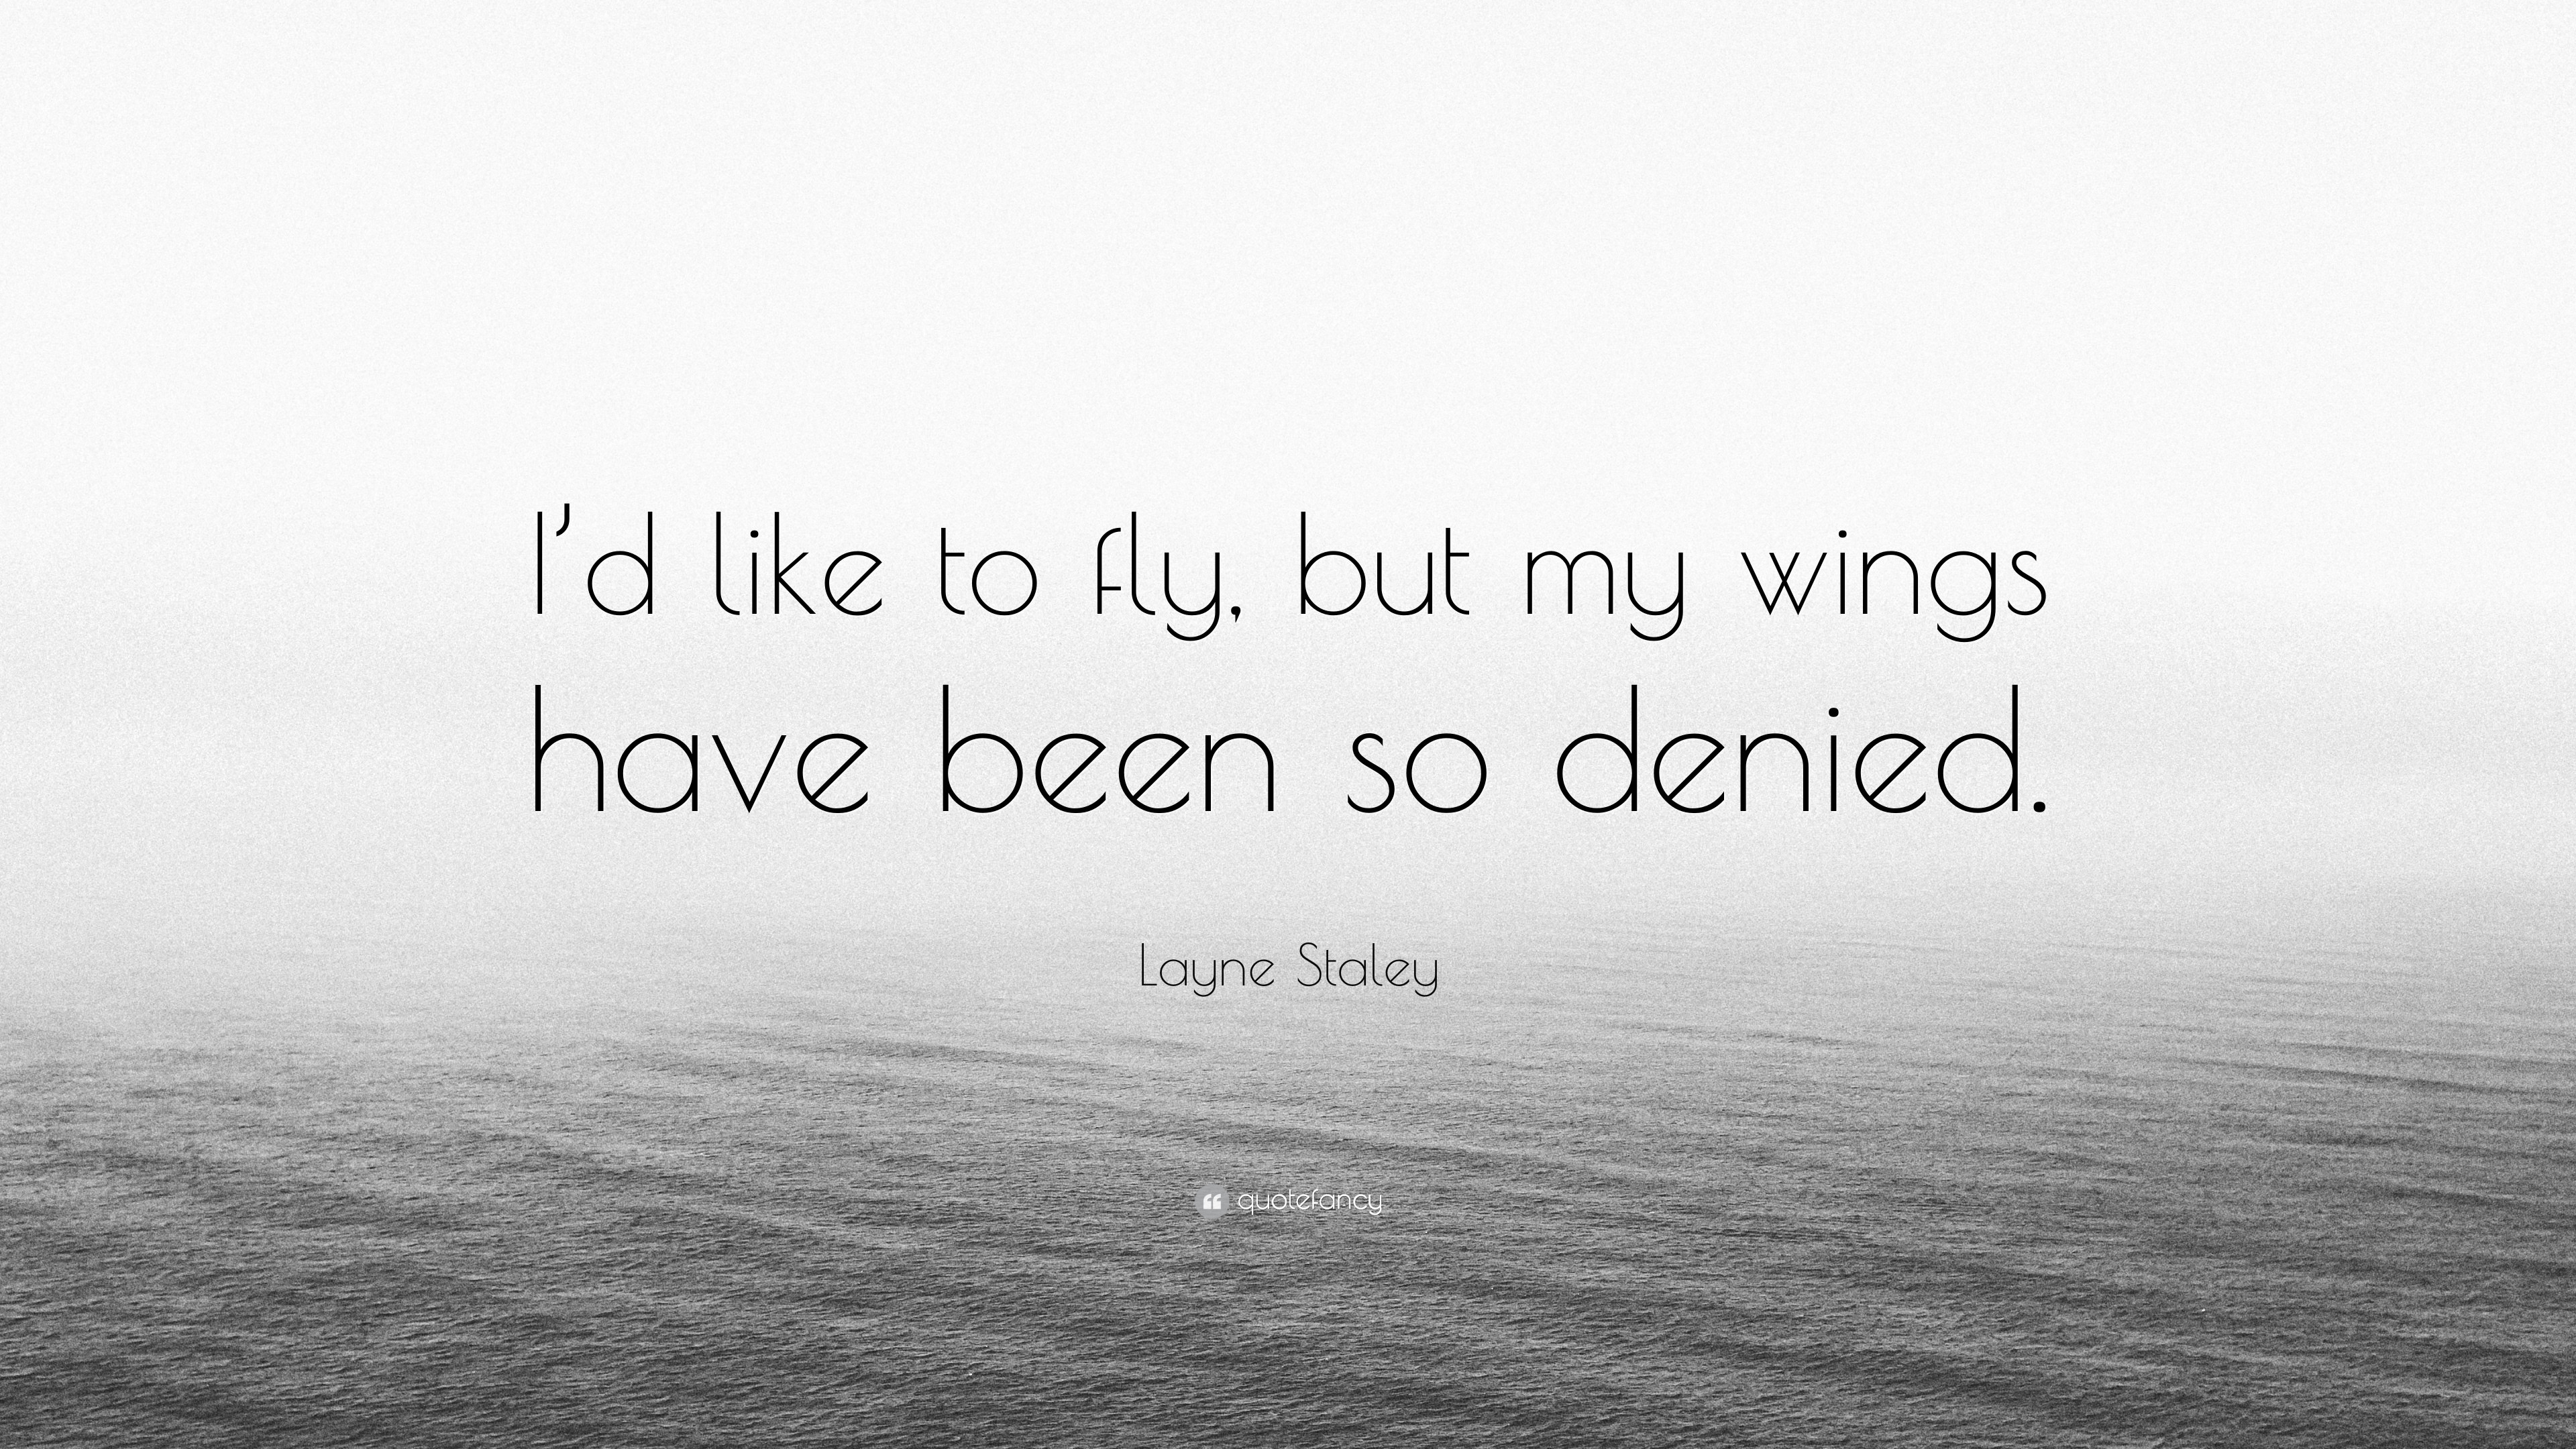 3840x2160 Layne Staley Quote: “I'd like to fly, but my wings have